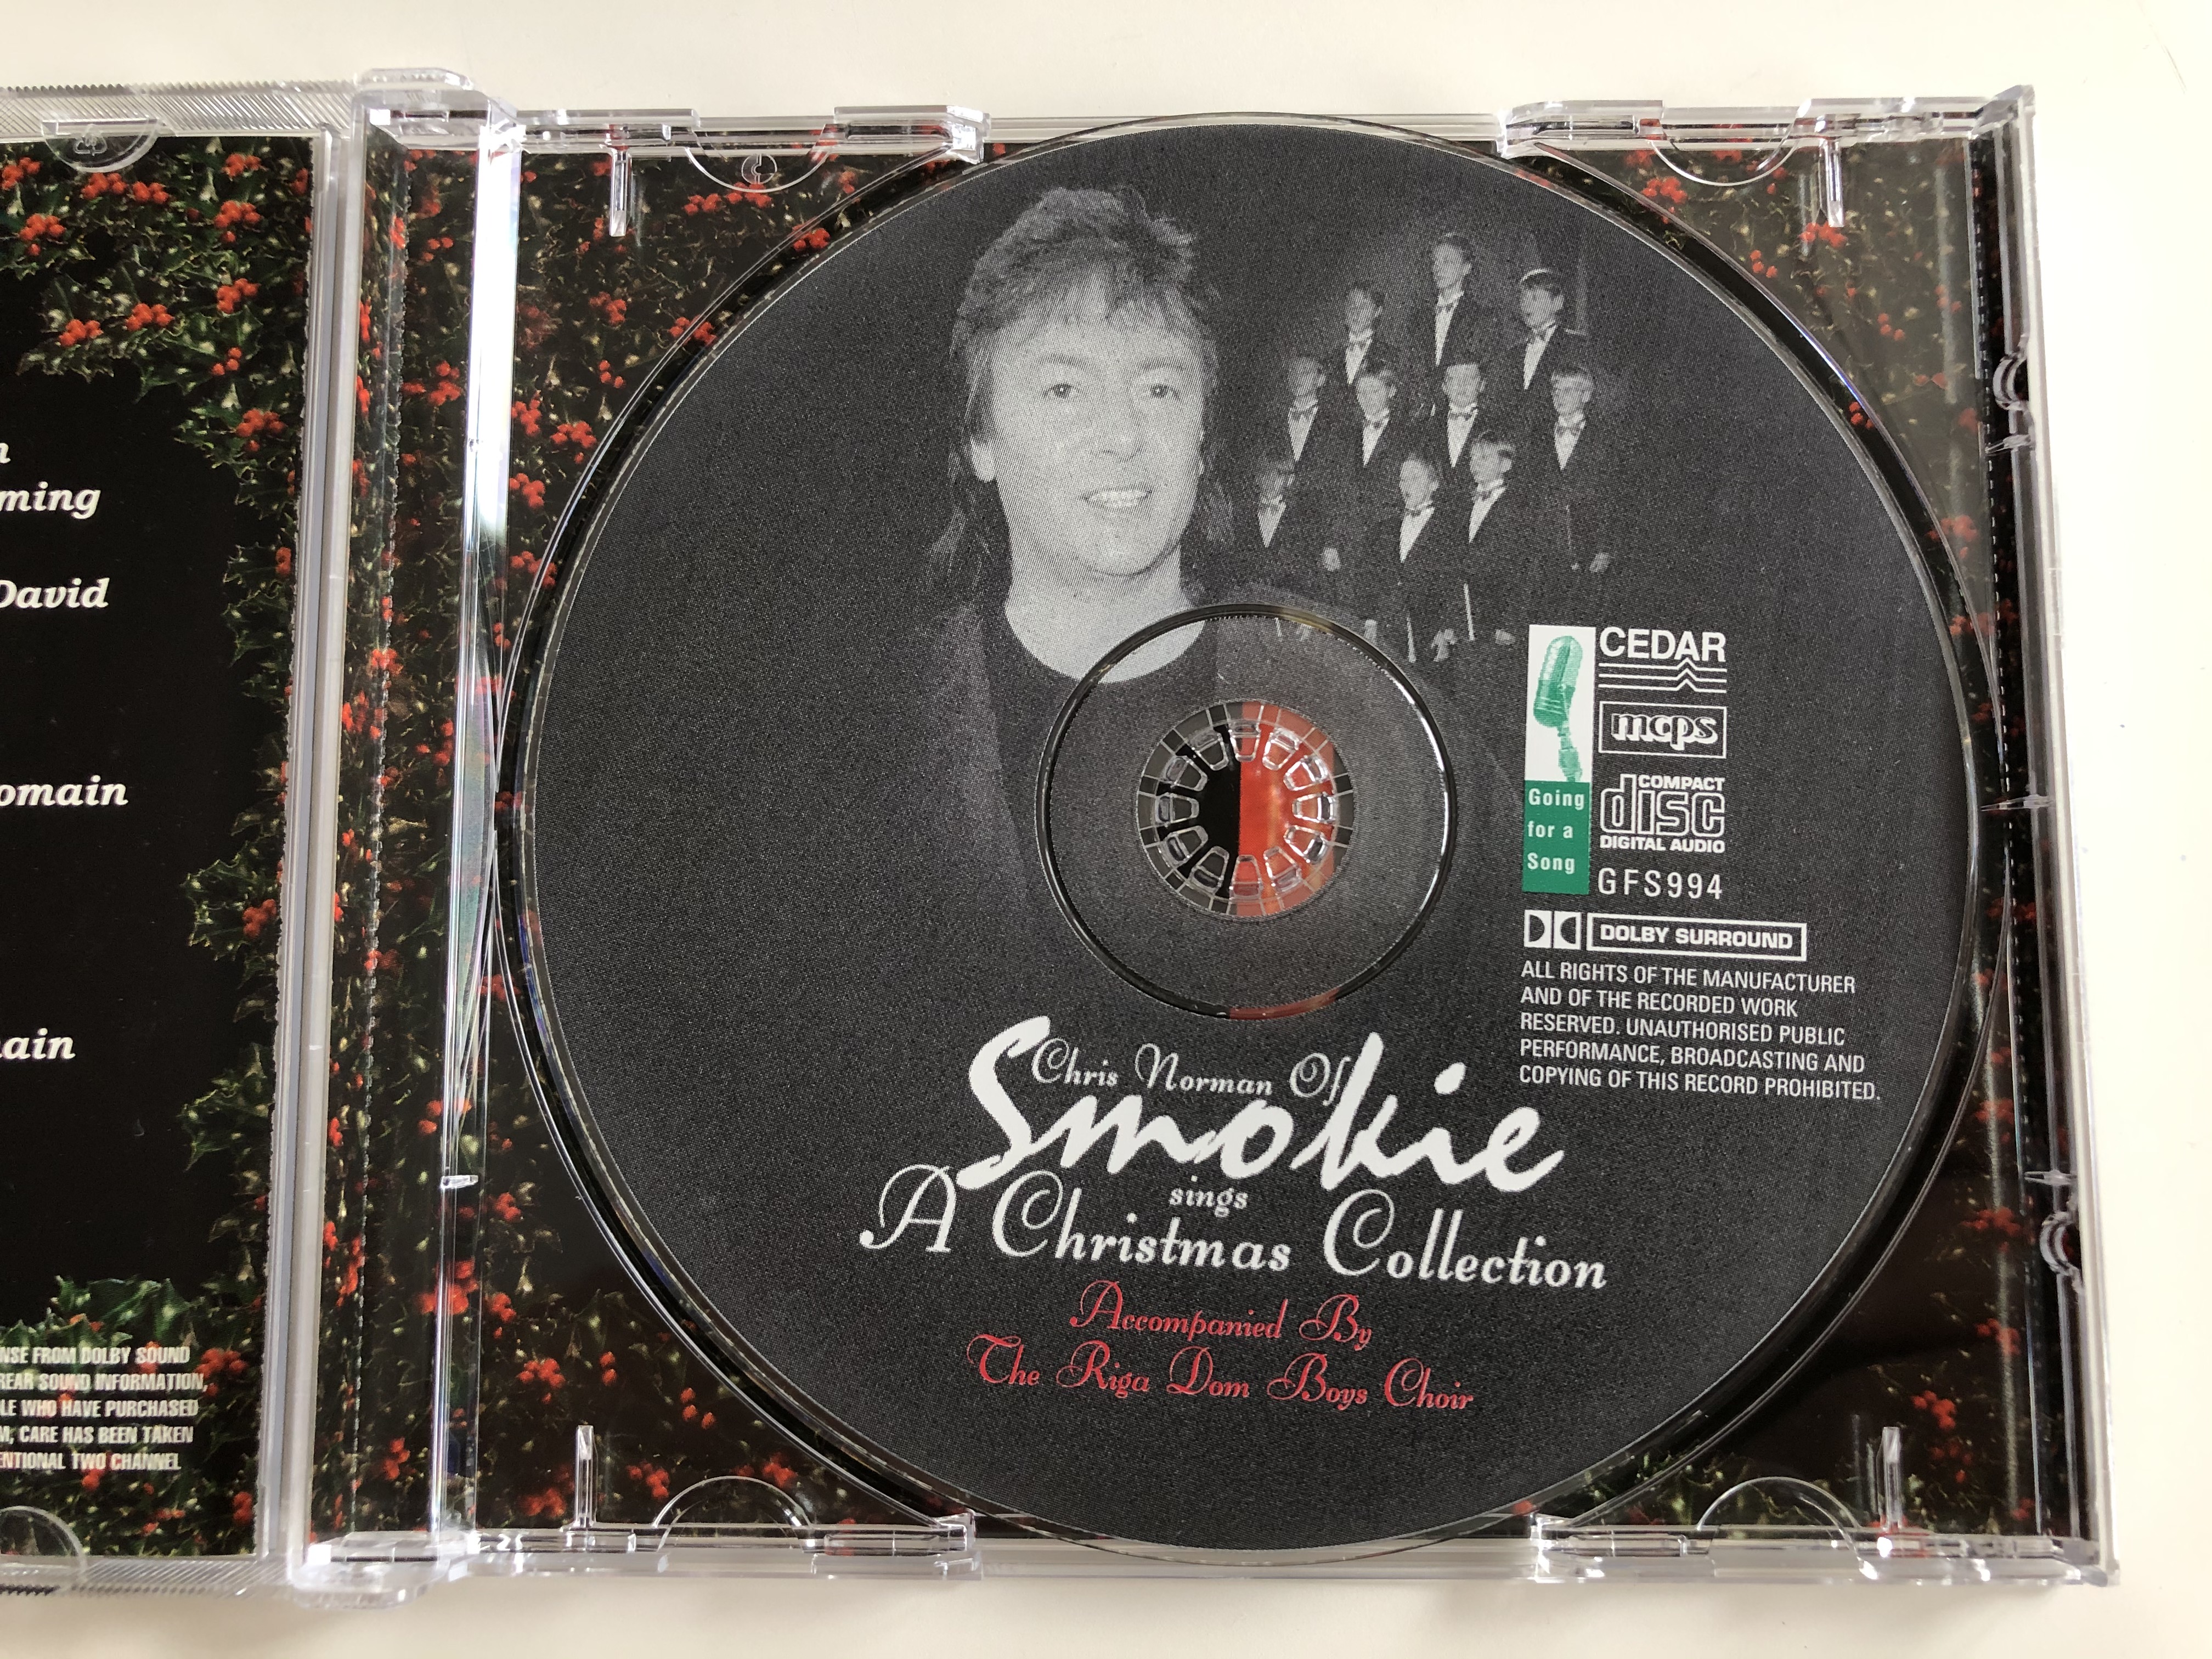 chris-norman-of-smokie-sings-a-christmas-collection-silent-night-panis-angelicus-christmas-song-and-many-more-accompanied-by-the-riga-dom-boys-choir-going-for-a-song-audio-cd-gfs994-4-.jpg